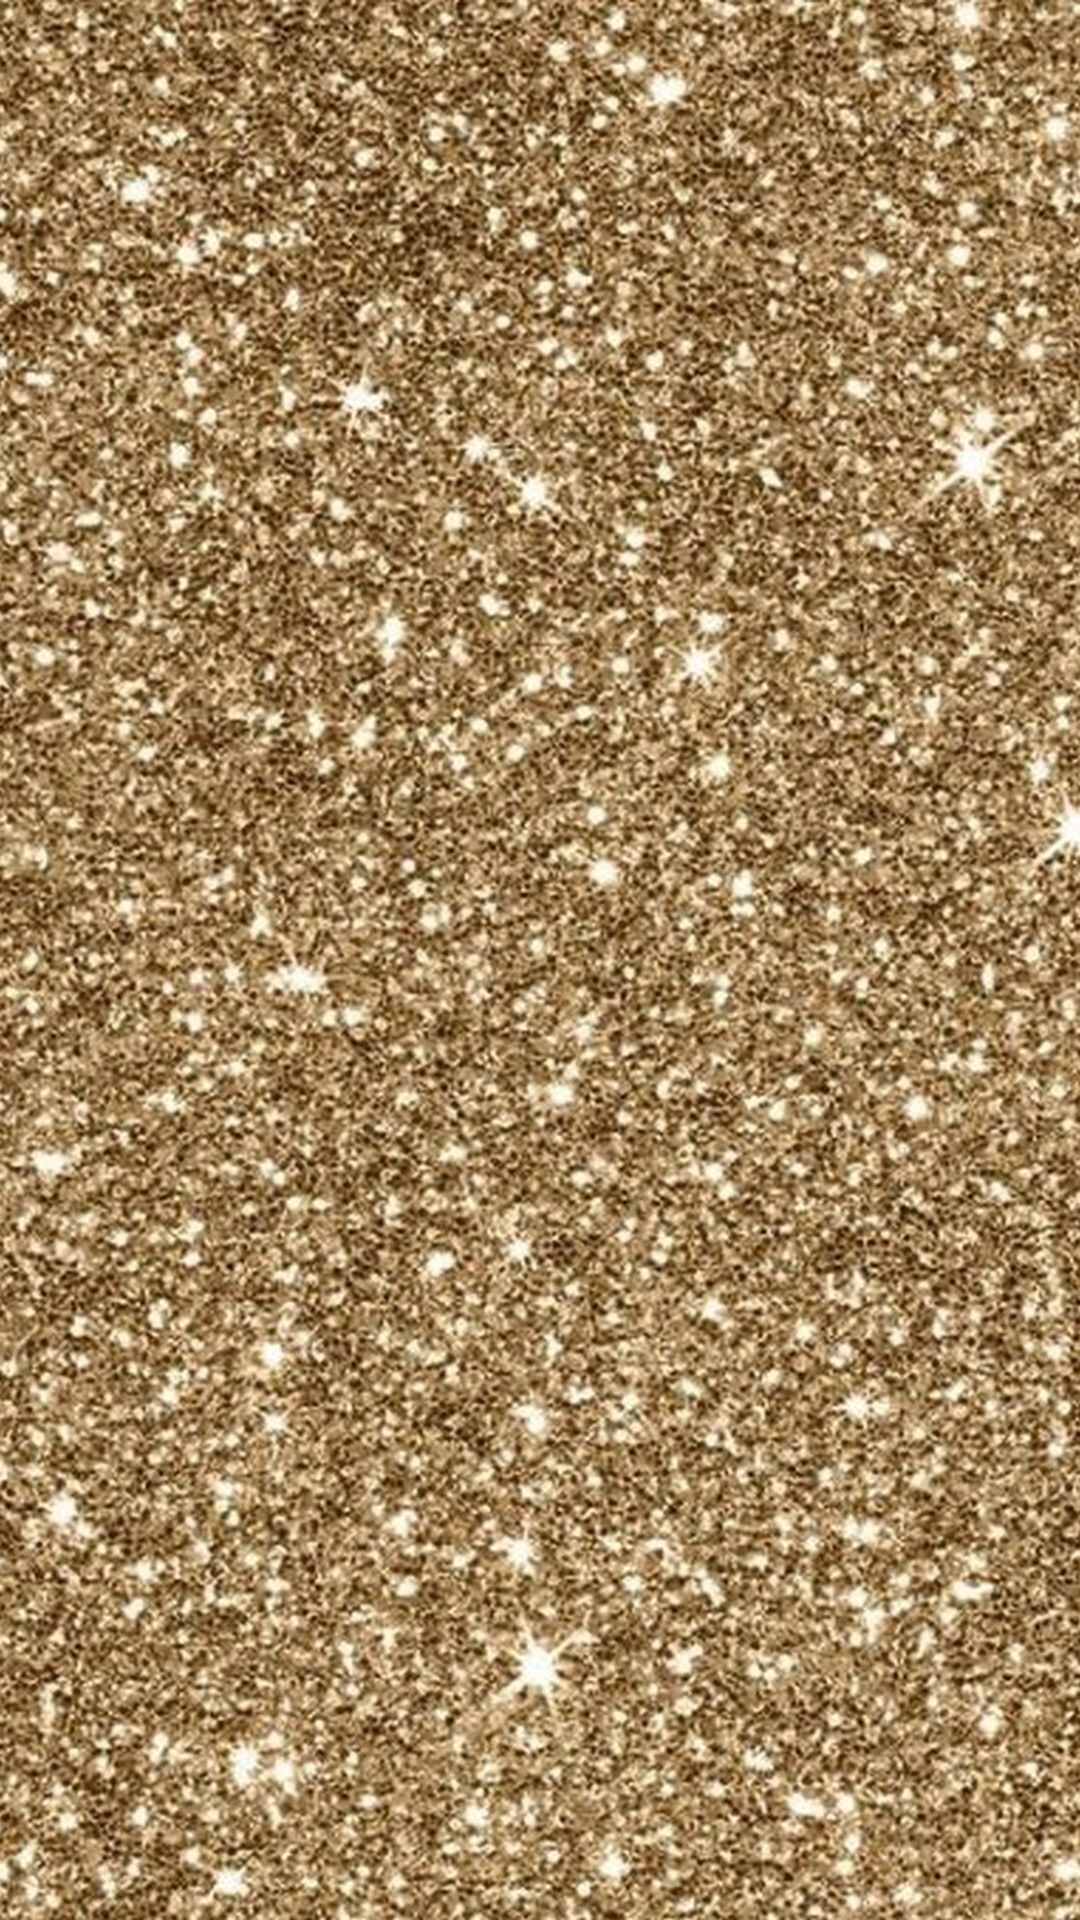 Gold Sparkle: Super fine particles of gold plastic, Small pieces of light-reflecting decorative material. 1080x1920 Full HD Background.